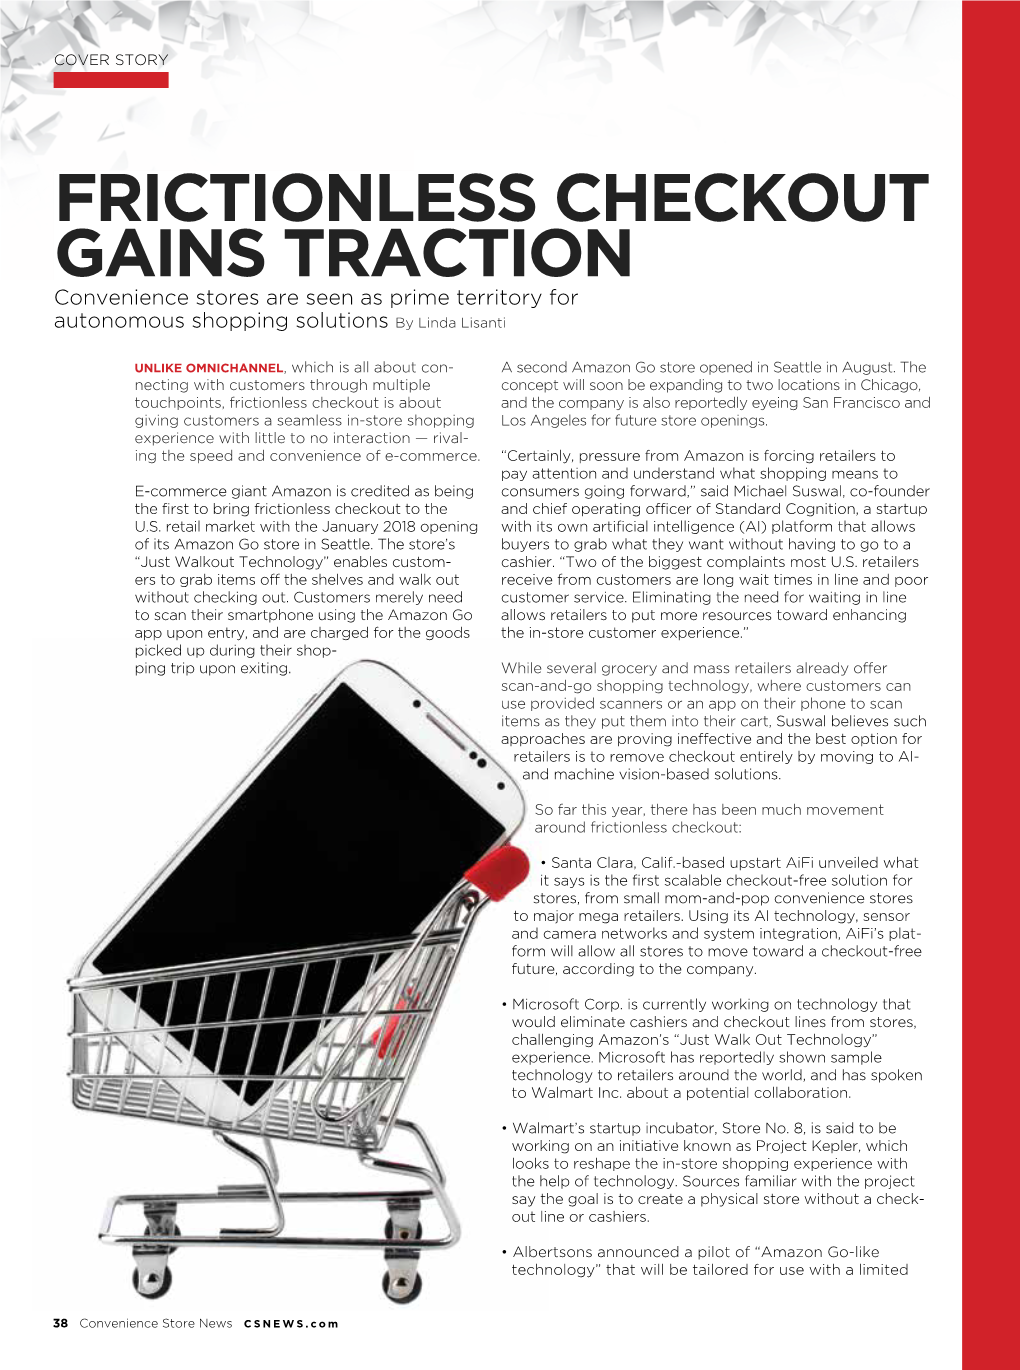 Frictionless Checkout Gains Traction.Pdf 184.51 KB